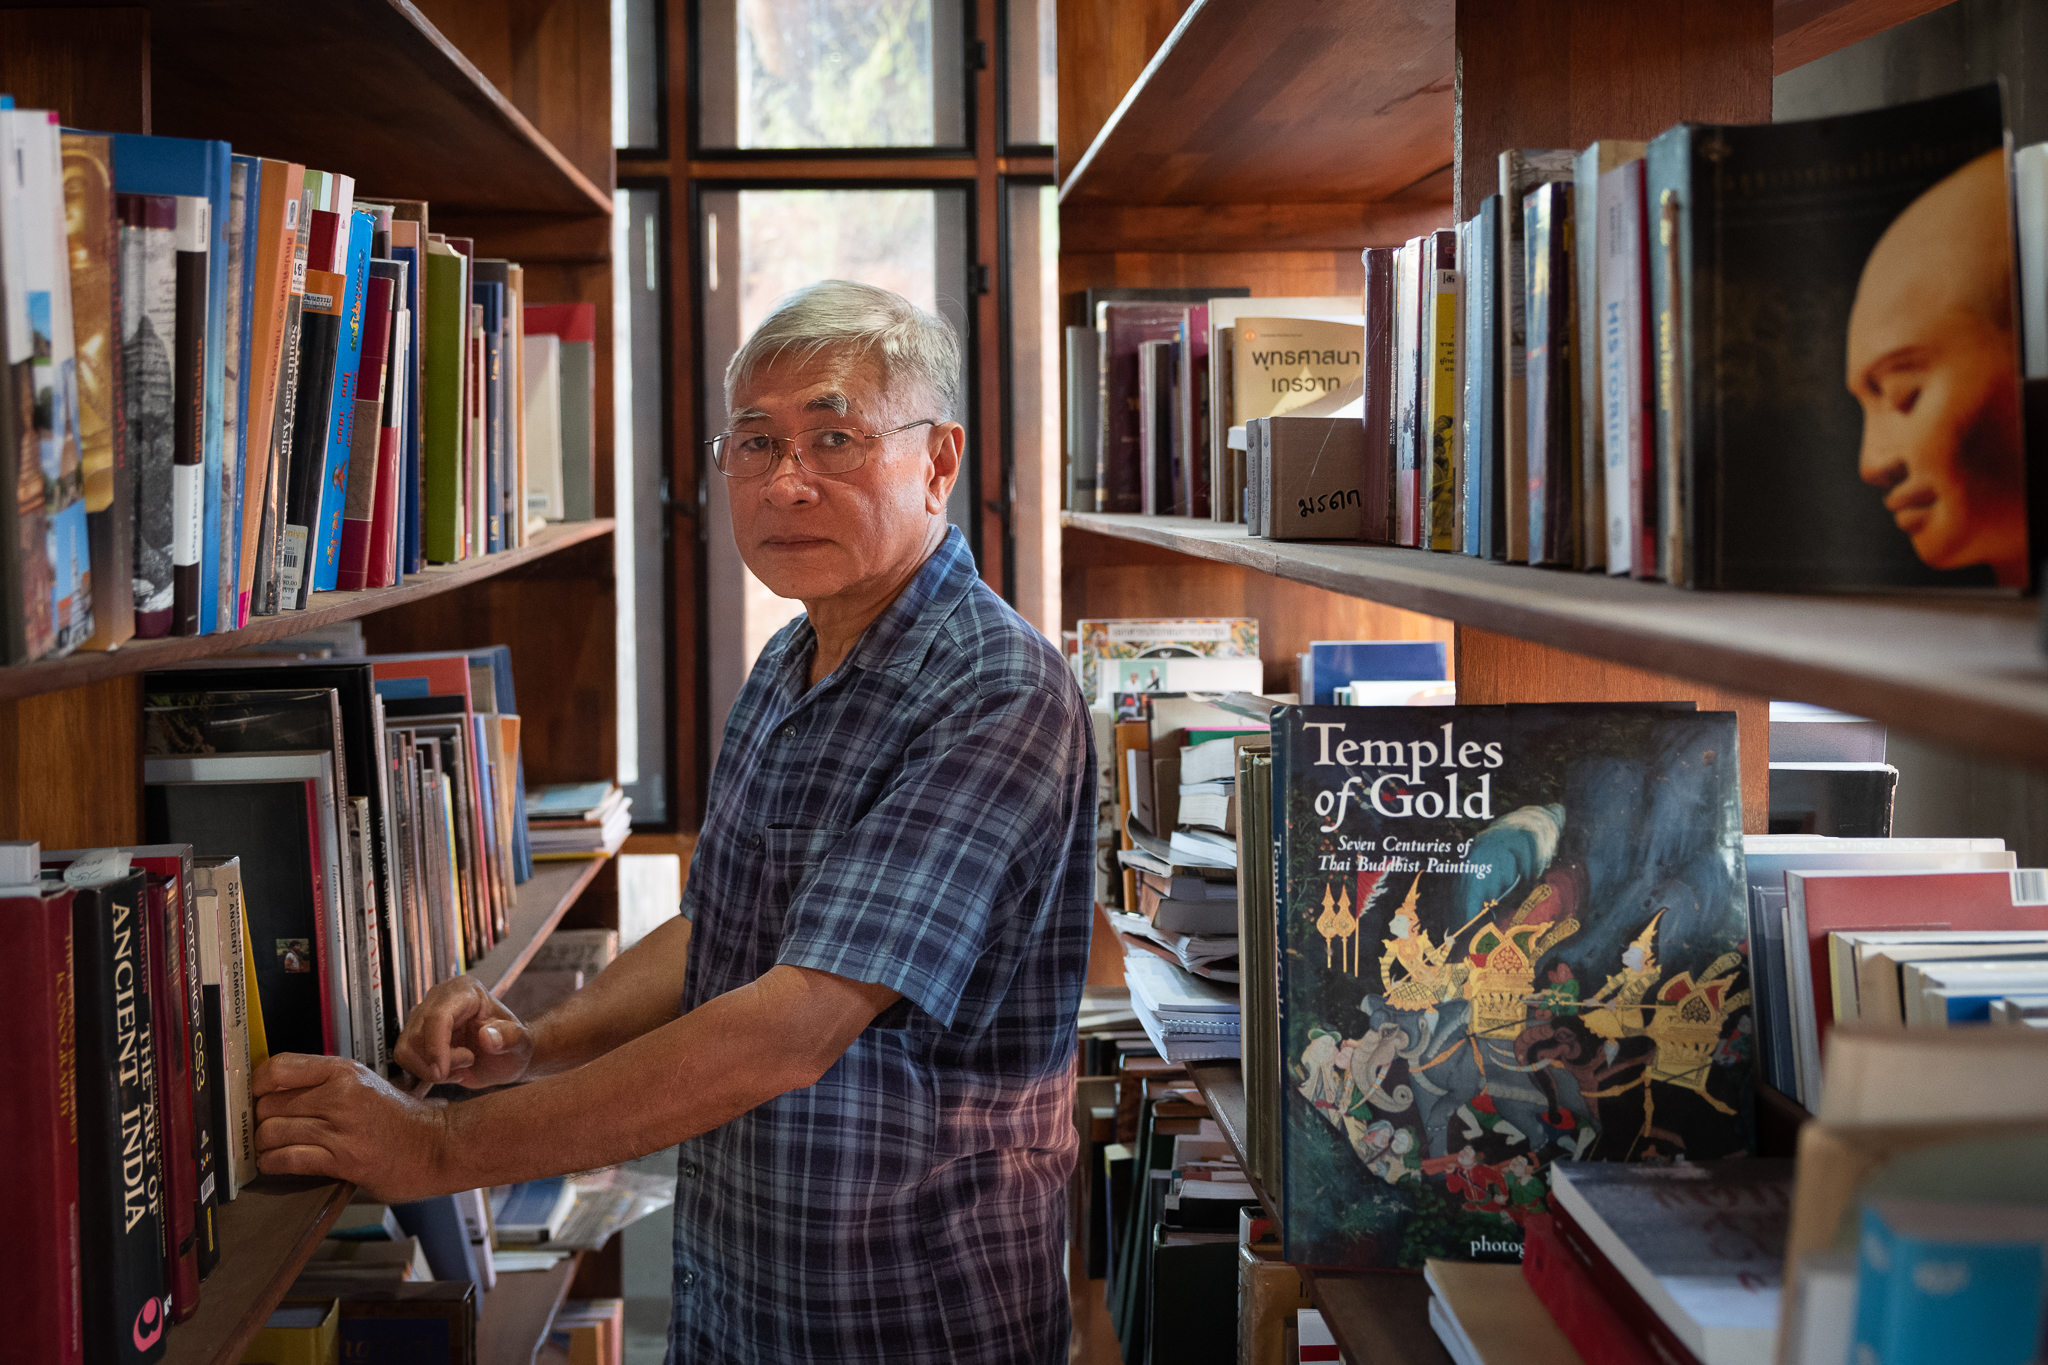 Tanongsak Hanwong, an archaeologist and member of Thailand's committee on repatriation of stolen artifacts, is pictured at his home in Pak Chong, Thailand, on Nov. 4, 2022. (Photo by Athikhom Saengchai/Special to The Denver Post)